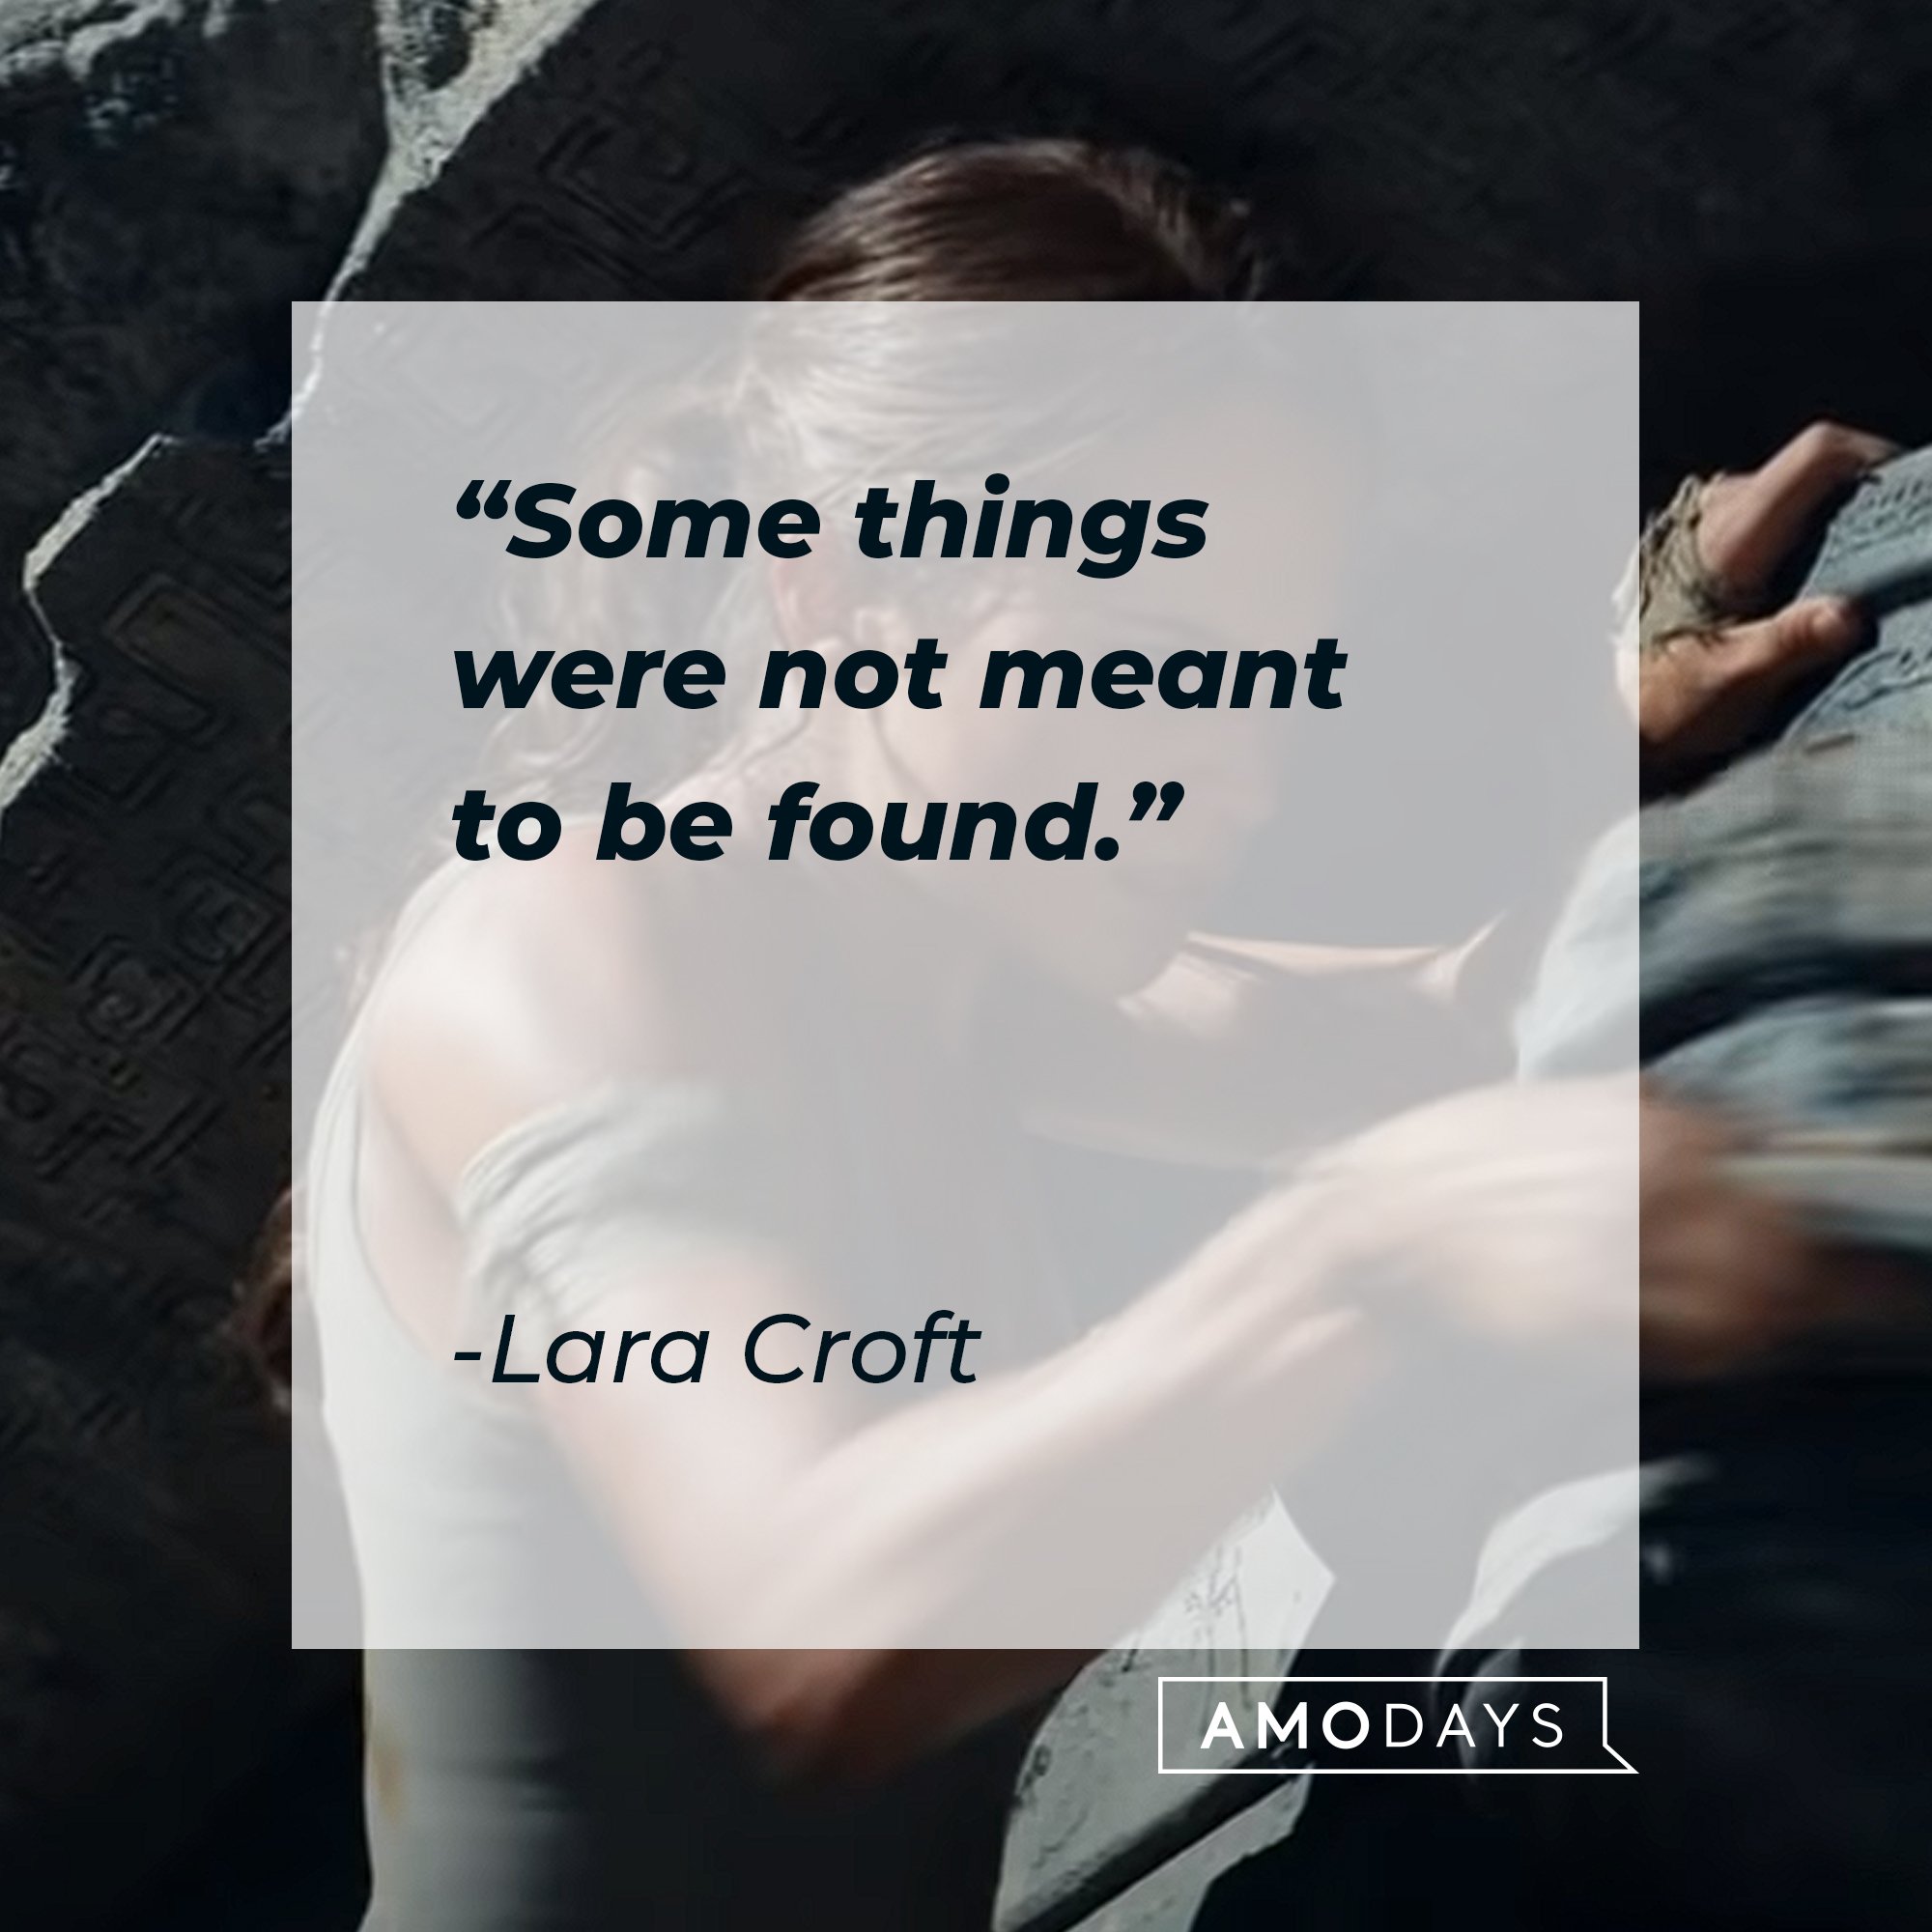 An image of Alicia Vikander’s Lara Croft with a Lara Croft quote: “Some things were not meant to be found.” | Source: youtube.com/WarnerBrosPictures